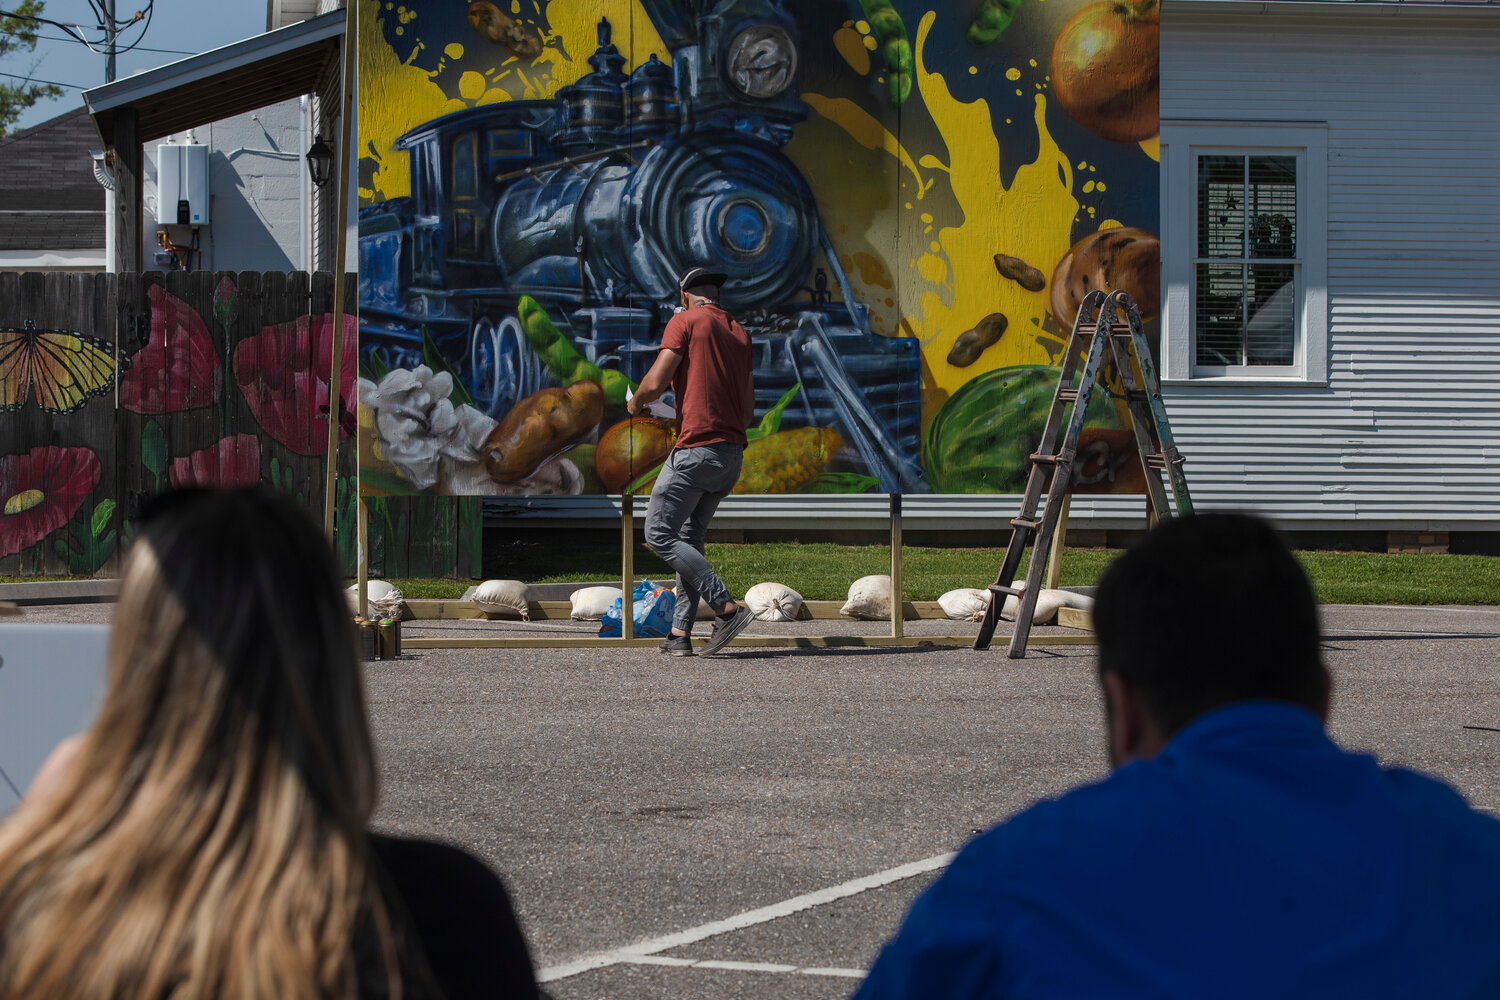 The artist known as ARCY spray paints a mural in six hours at the CATalyst event in downtown Foley.